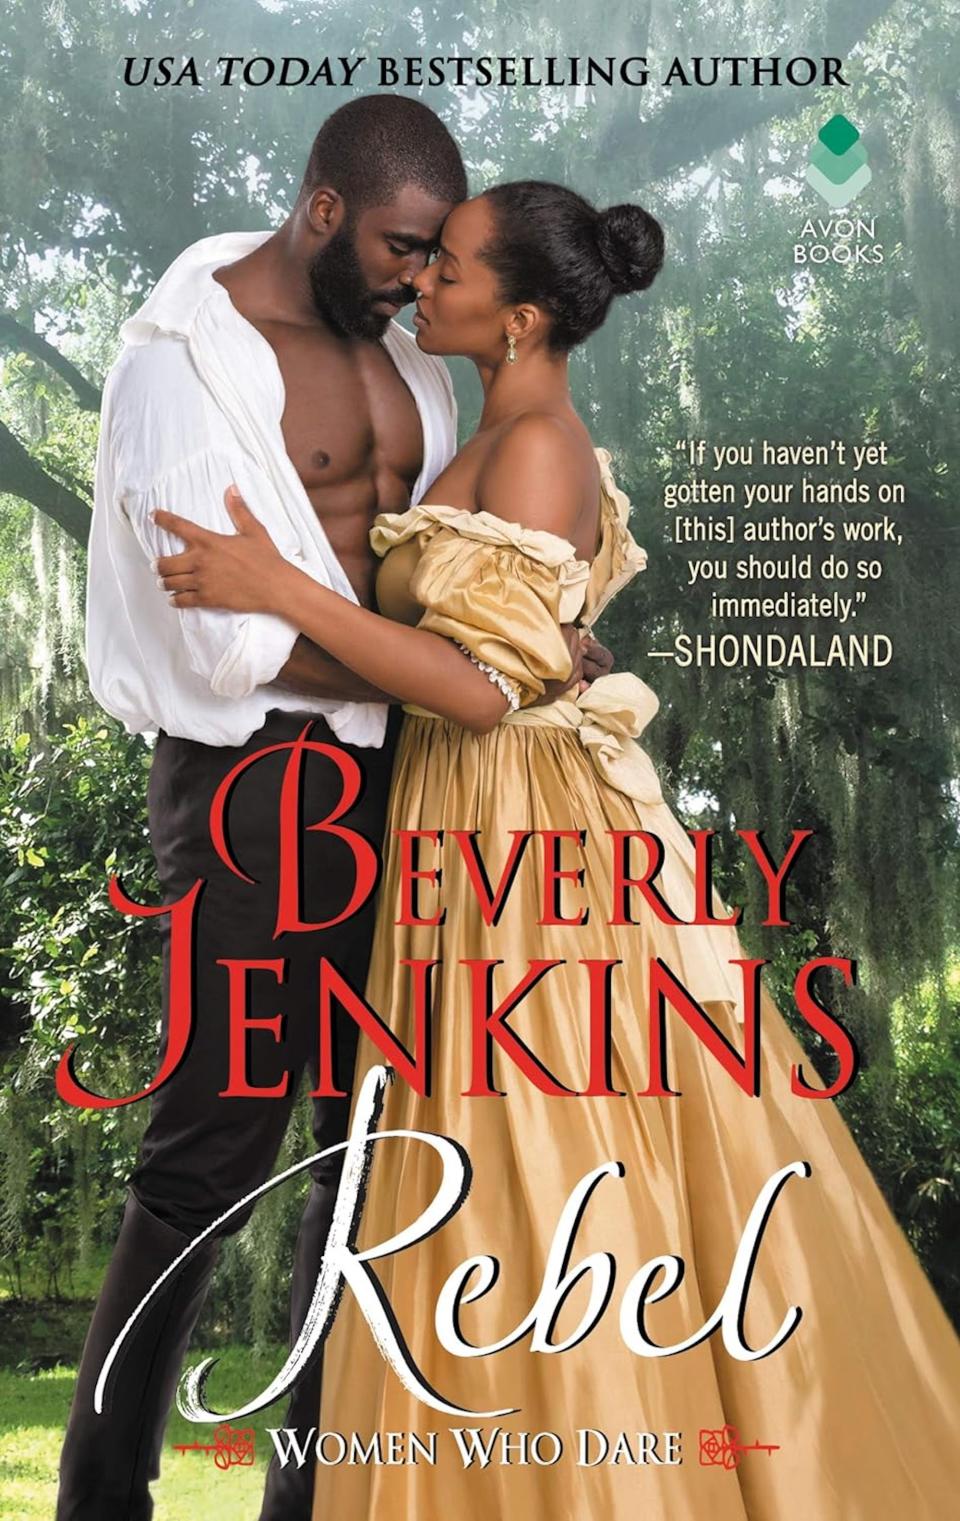 The cover of "Rebel" by Beverly Jenkins.